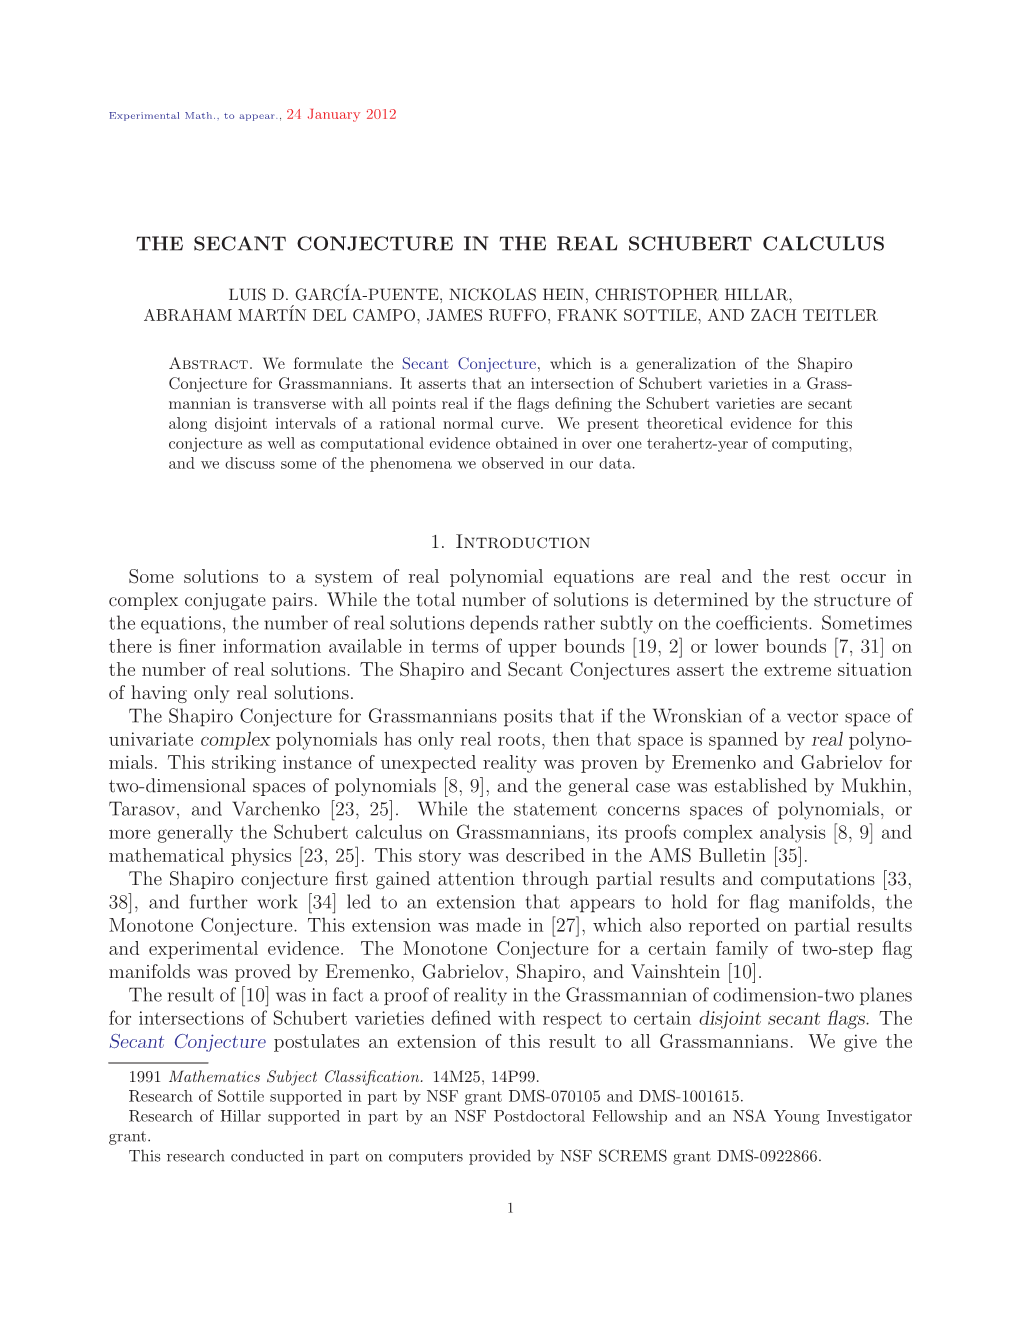 The Secant Conjecture in the Real Schubert Calculus